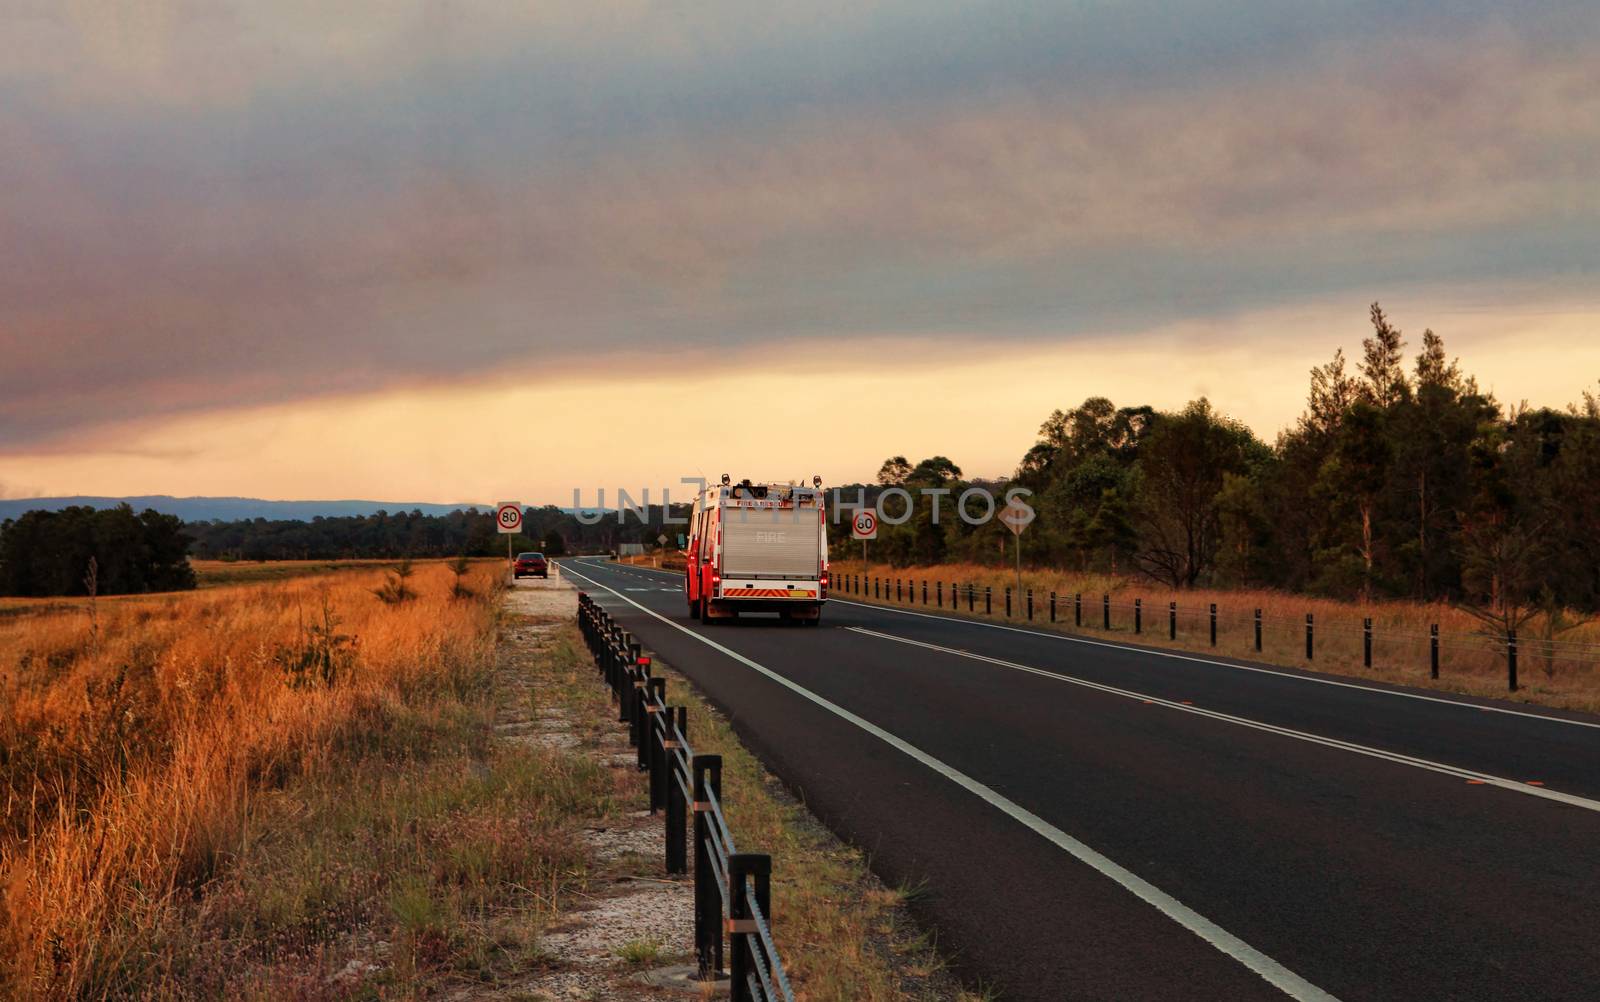 Fire and Rescue response to a bushfire by lovleah